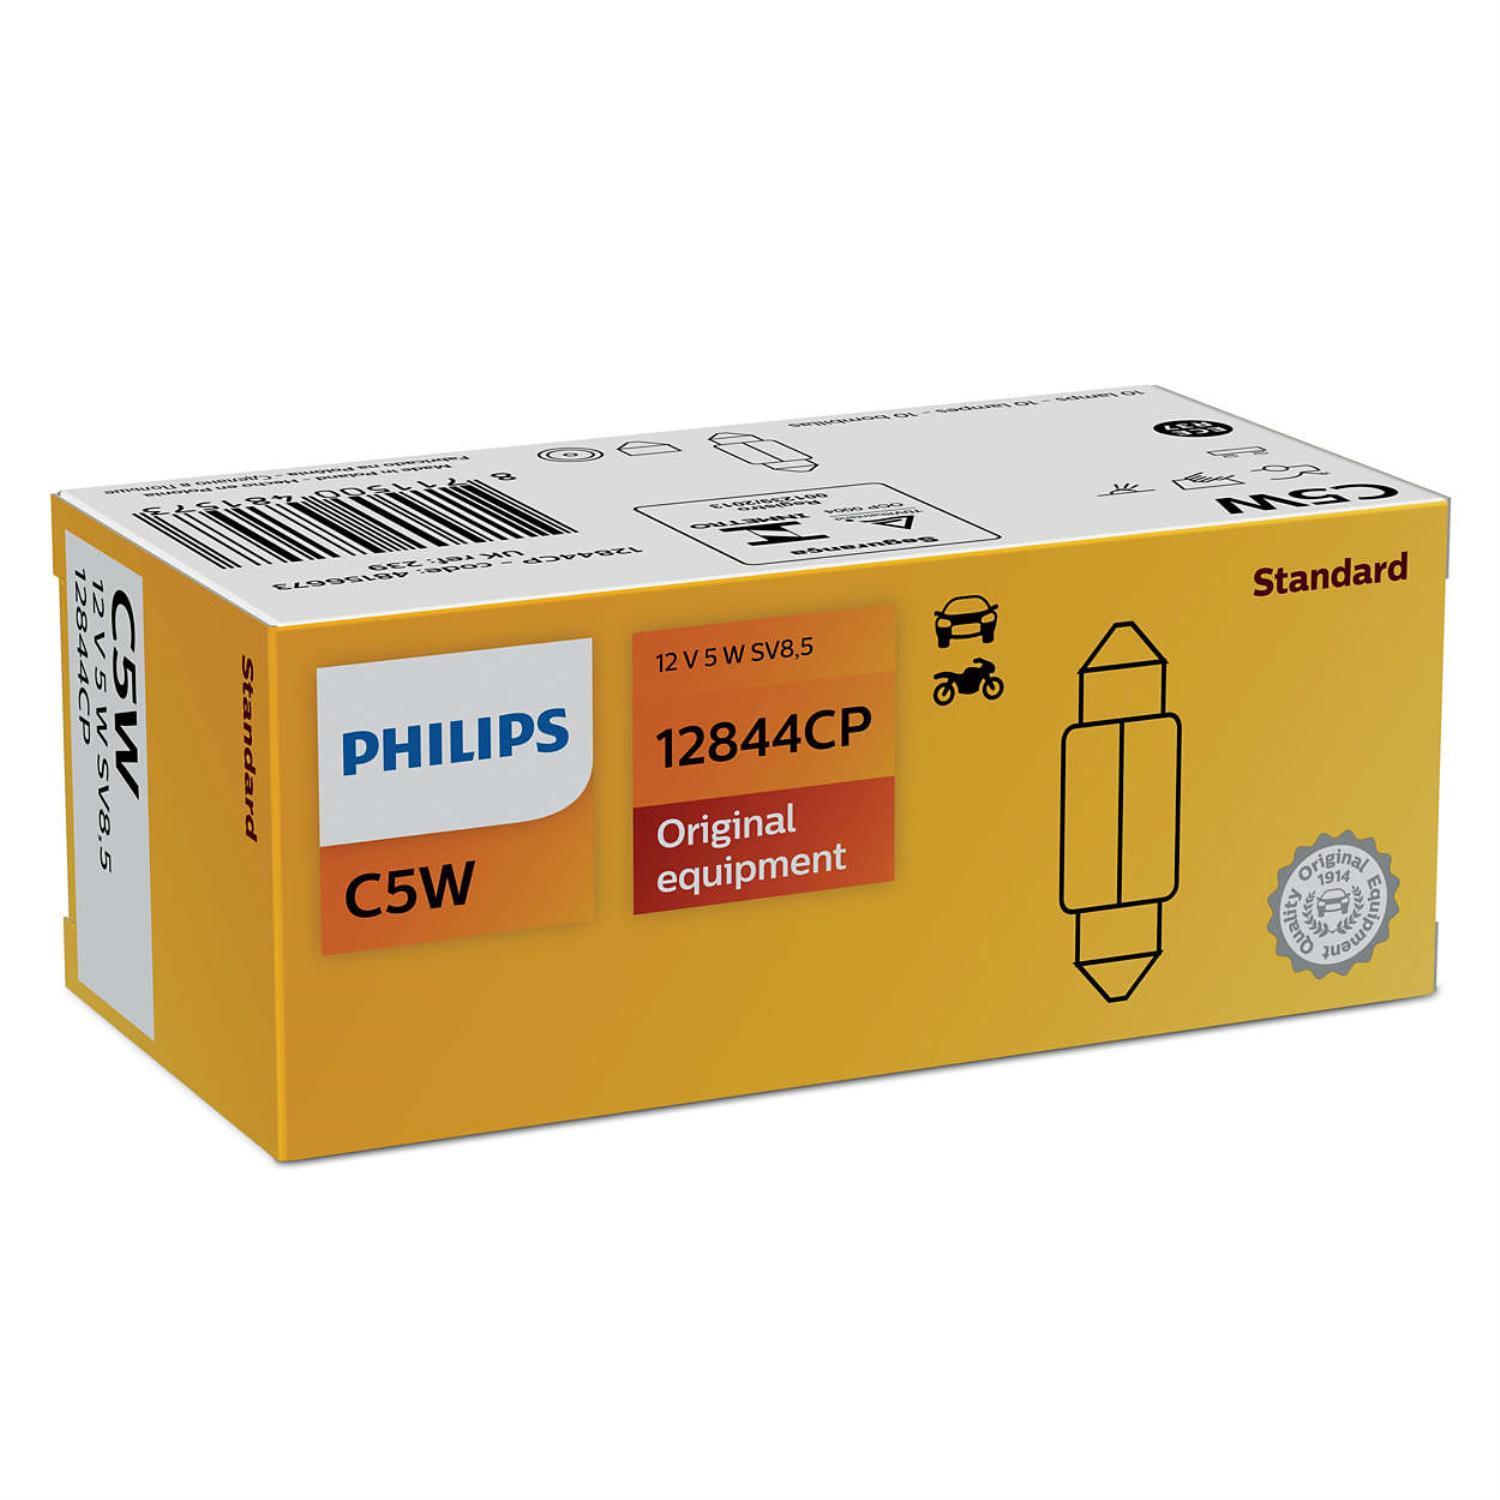 PHILIPS 12844CP Glühlampe Beleuchtung